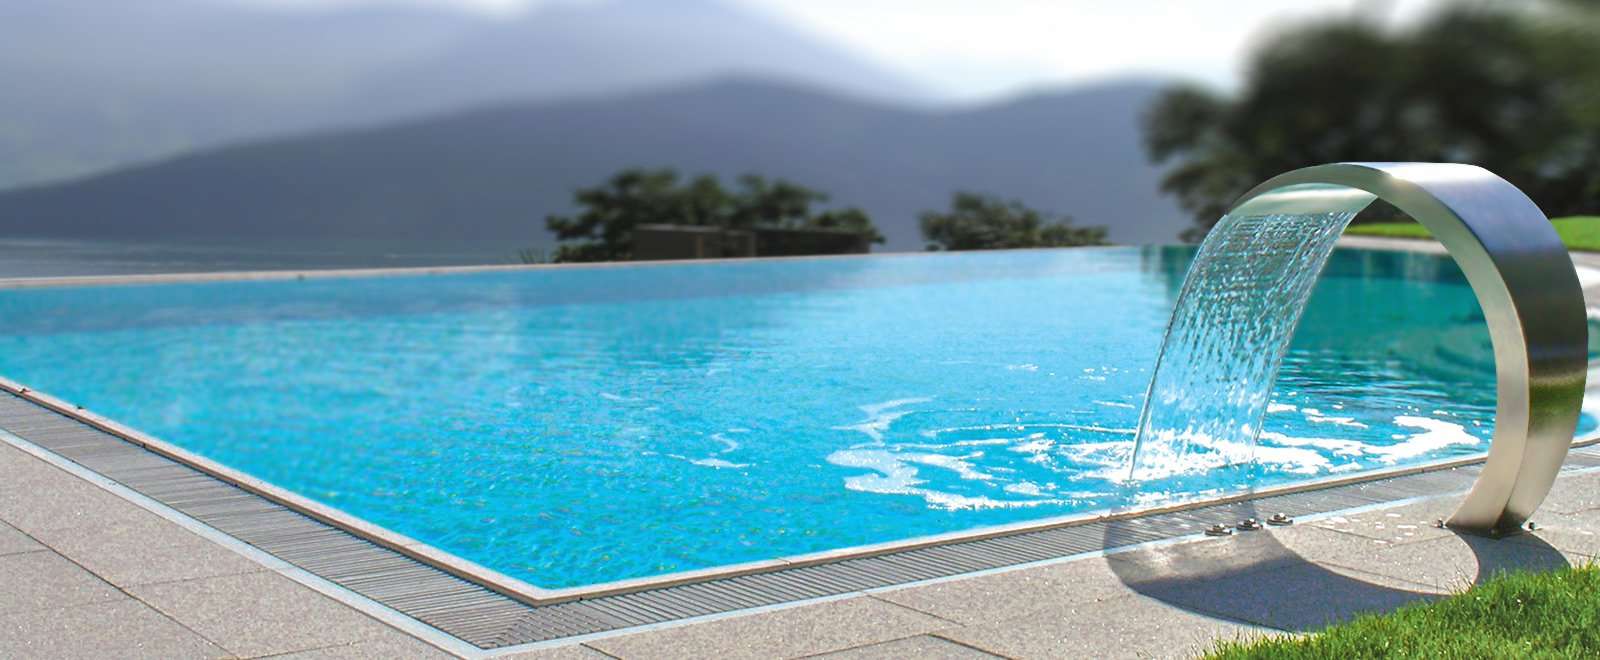 Why Fiberglass Pool Is Better Than Concrete